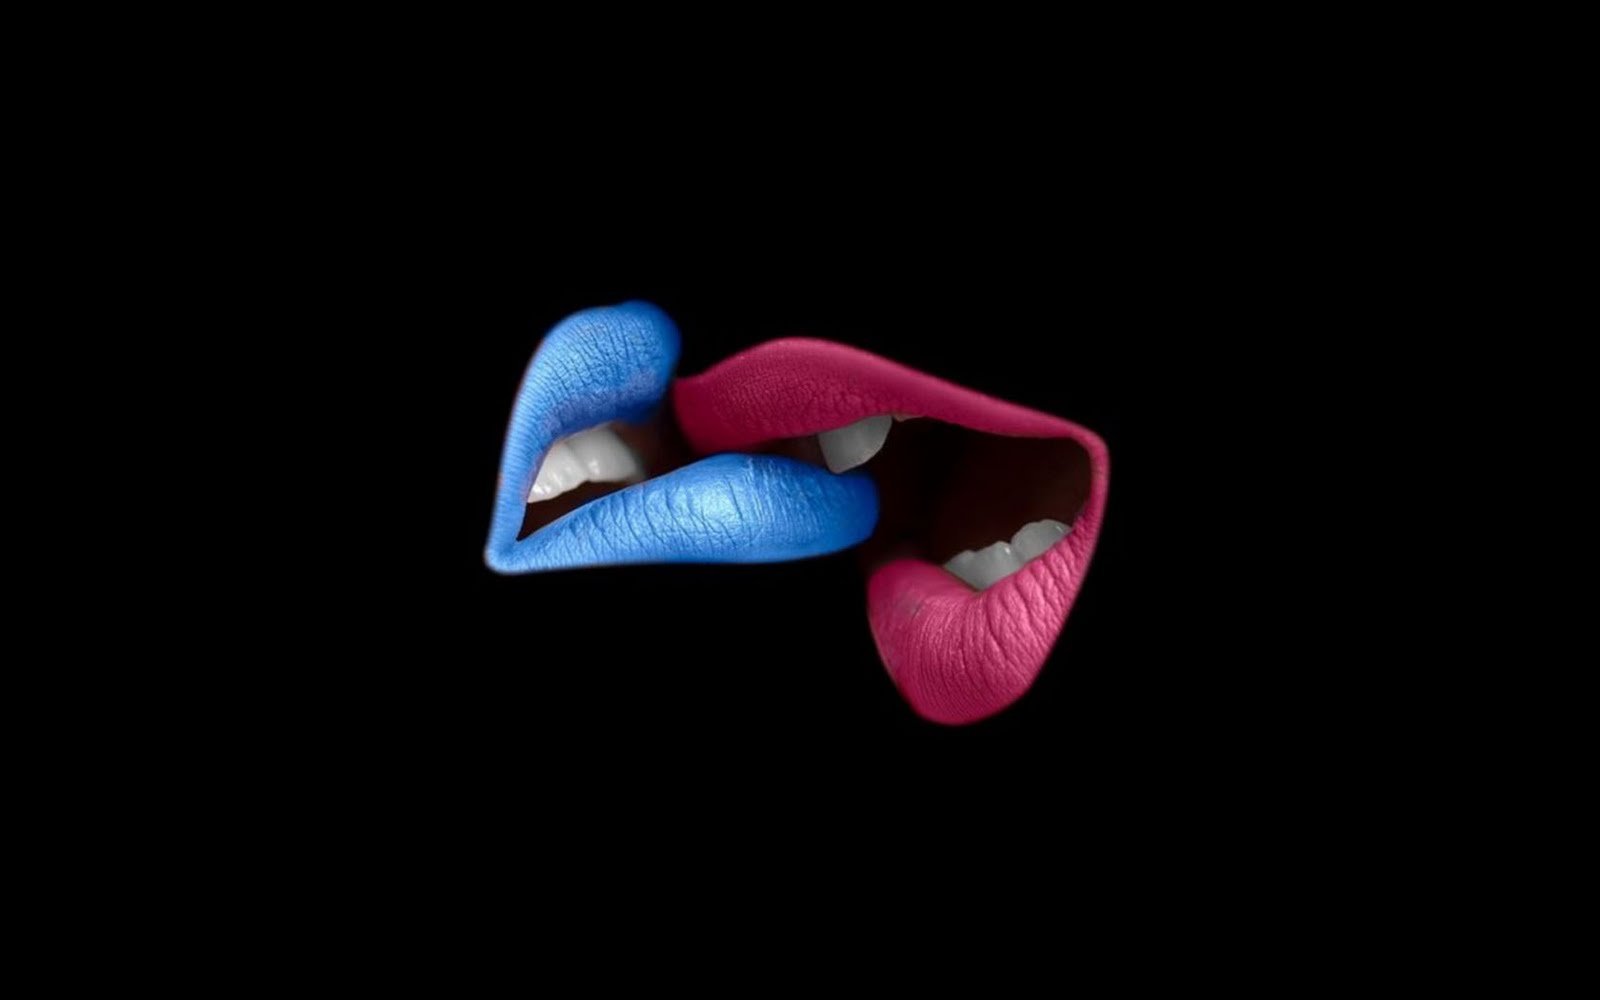  and Mobile Phones 20 HD Best Collection of Colorful Lips Wallpapers